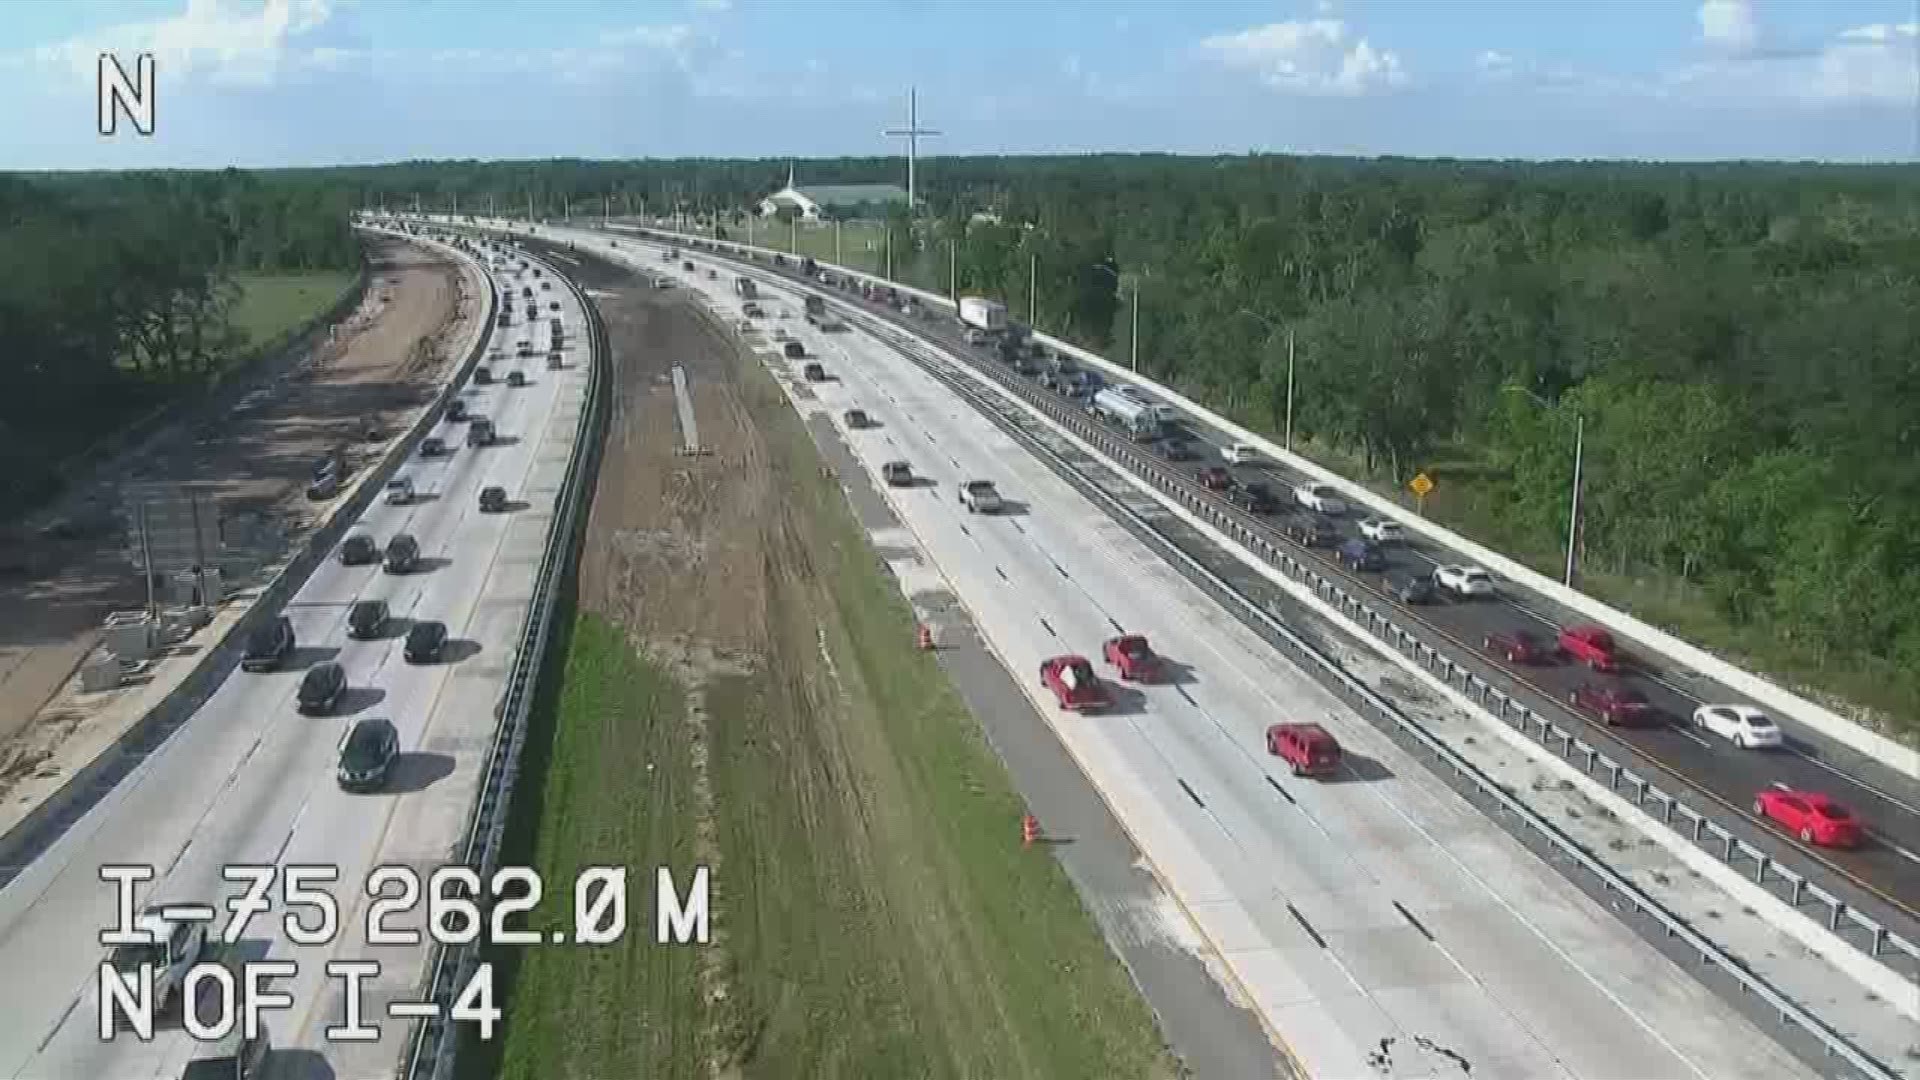 Florida is on the fast track to building three new major toll highways in mostly rural areas under a bill sent to Gov. Ron DeSantis by the state House on Wednesday despite concerns over their potential negative impact on the environment.

The bill, passed on a 76-36 vote, creates task forces to study the potential routes and commits tens of millions of dollars for eventual construction of the highways. Supporters say the roads will spur rural job growth, relieve congestion on Interstate 75 and Interstate 4 — the main tourist road to Walt Disney World and other Orlando theme parks — and create new hurricane evacuation routes.